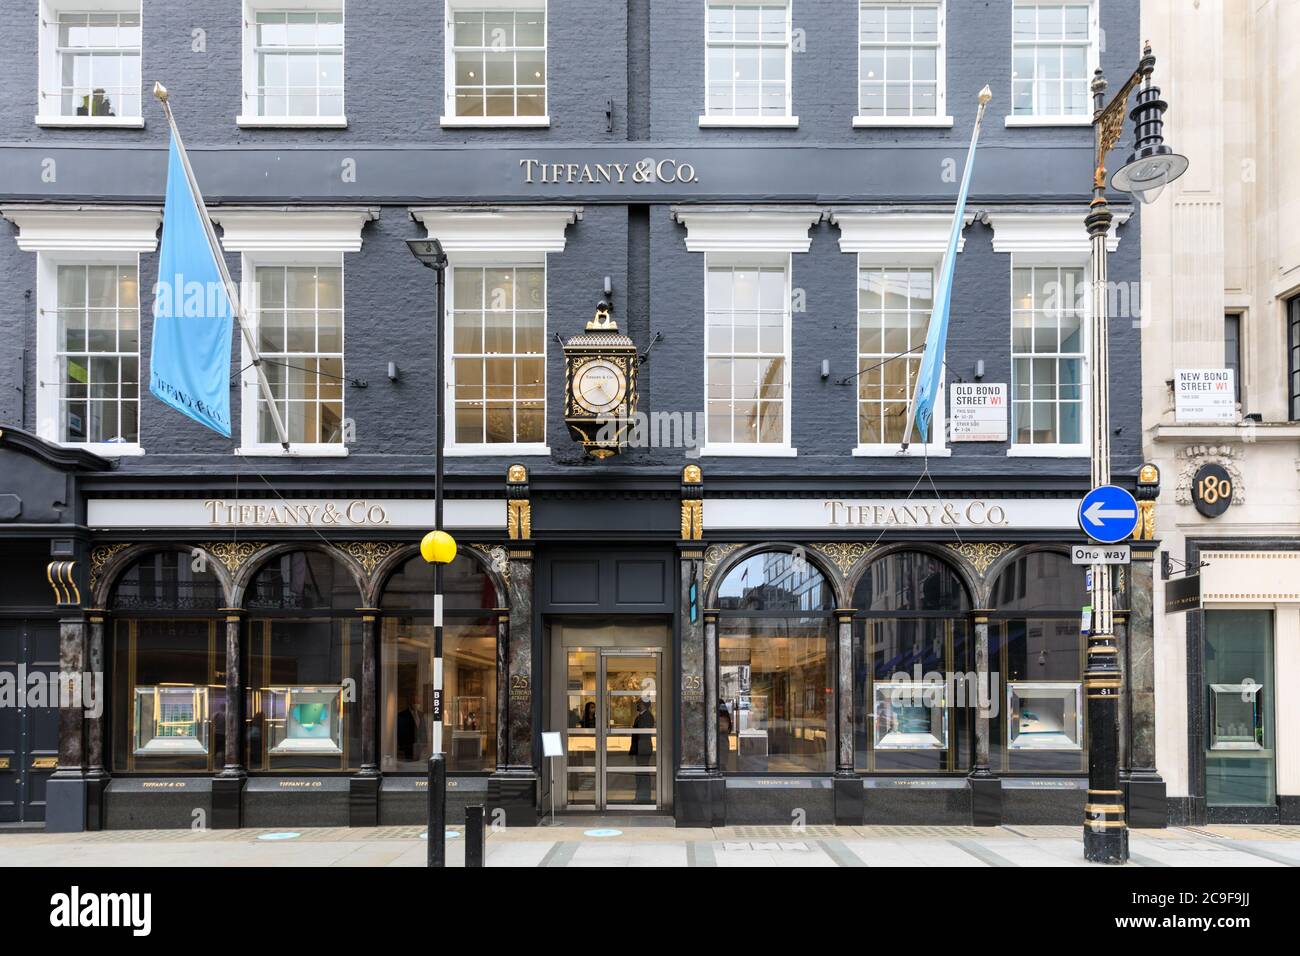 Tiffany & Co. luxury jeweler and jewelry brand flagship store exterior ...